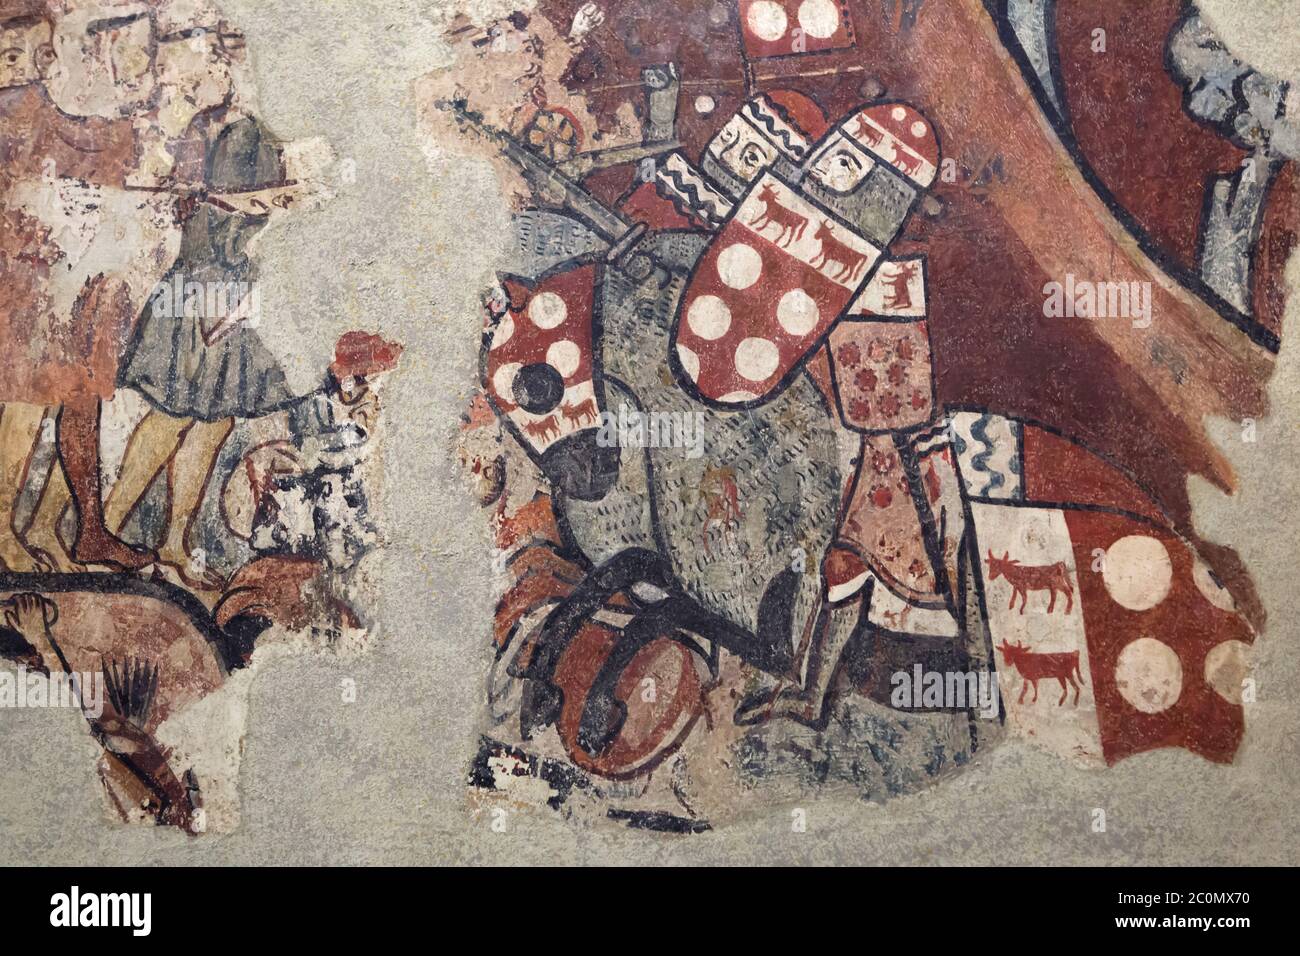 Conquest of Majorca depicted in the Gothic mural paintings dated from 1285-1290, now on display in the National Art Museum of Catalonia (Museu Nacional d'Art de Catalunya) in Barcelona, Catalonia, Spain. Knight Guillem II de Montcada is depicted during the Battle of Portopí between the Almohad troops and the Christian army led by King James I the Conqueror on 12 September 1229 in the detail. The murals painted by an anonymous Catalan painter known as the Master of the Conquest of Majorca (Maestro de la conquista de Mallorca) was transferred from the former ancestral home of the Caldes family i Stock Photo